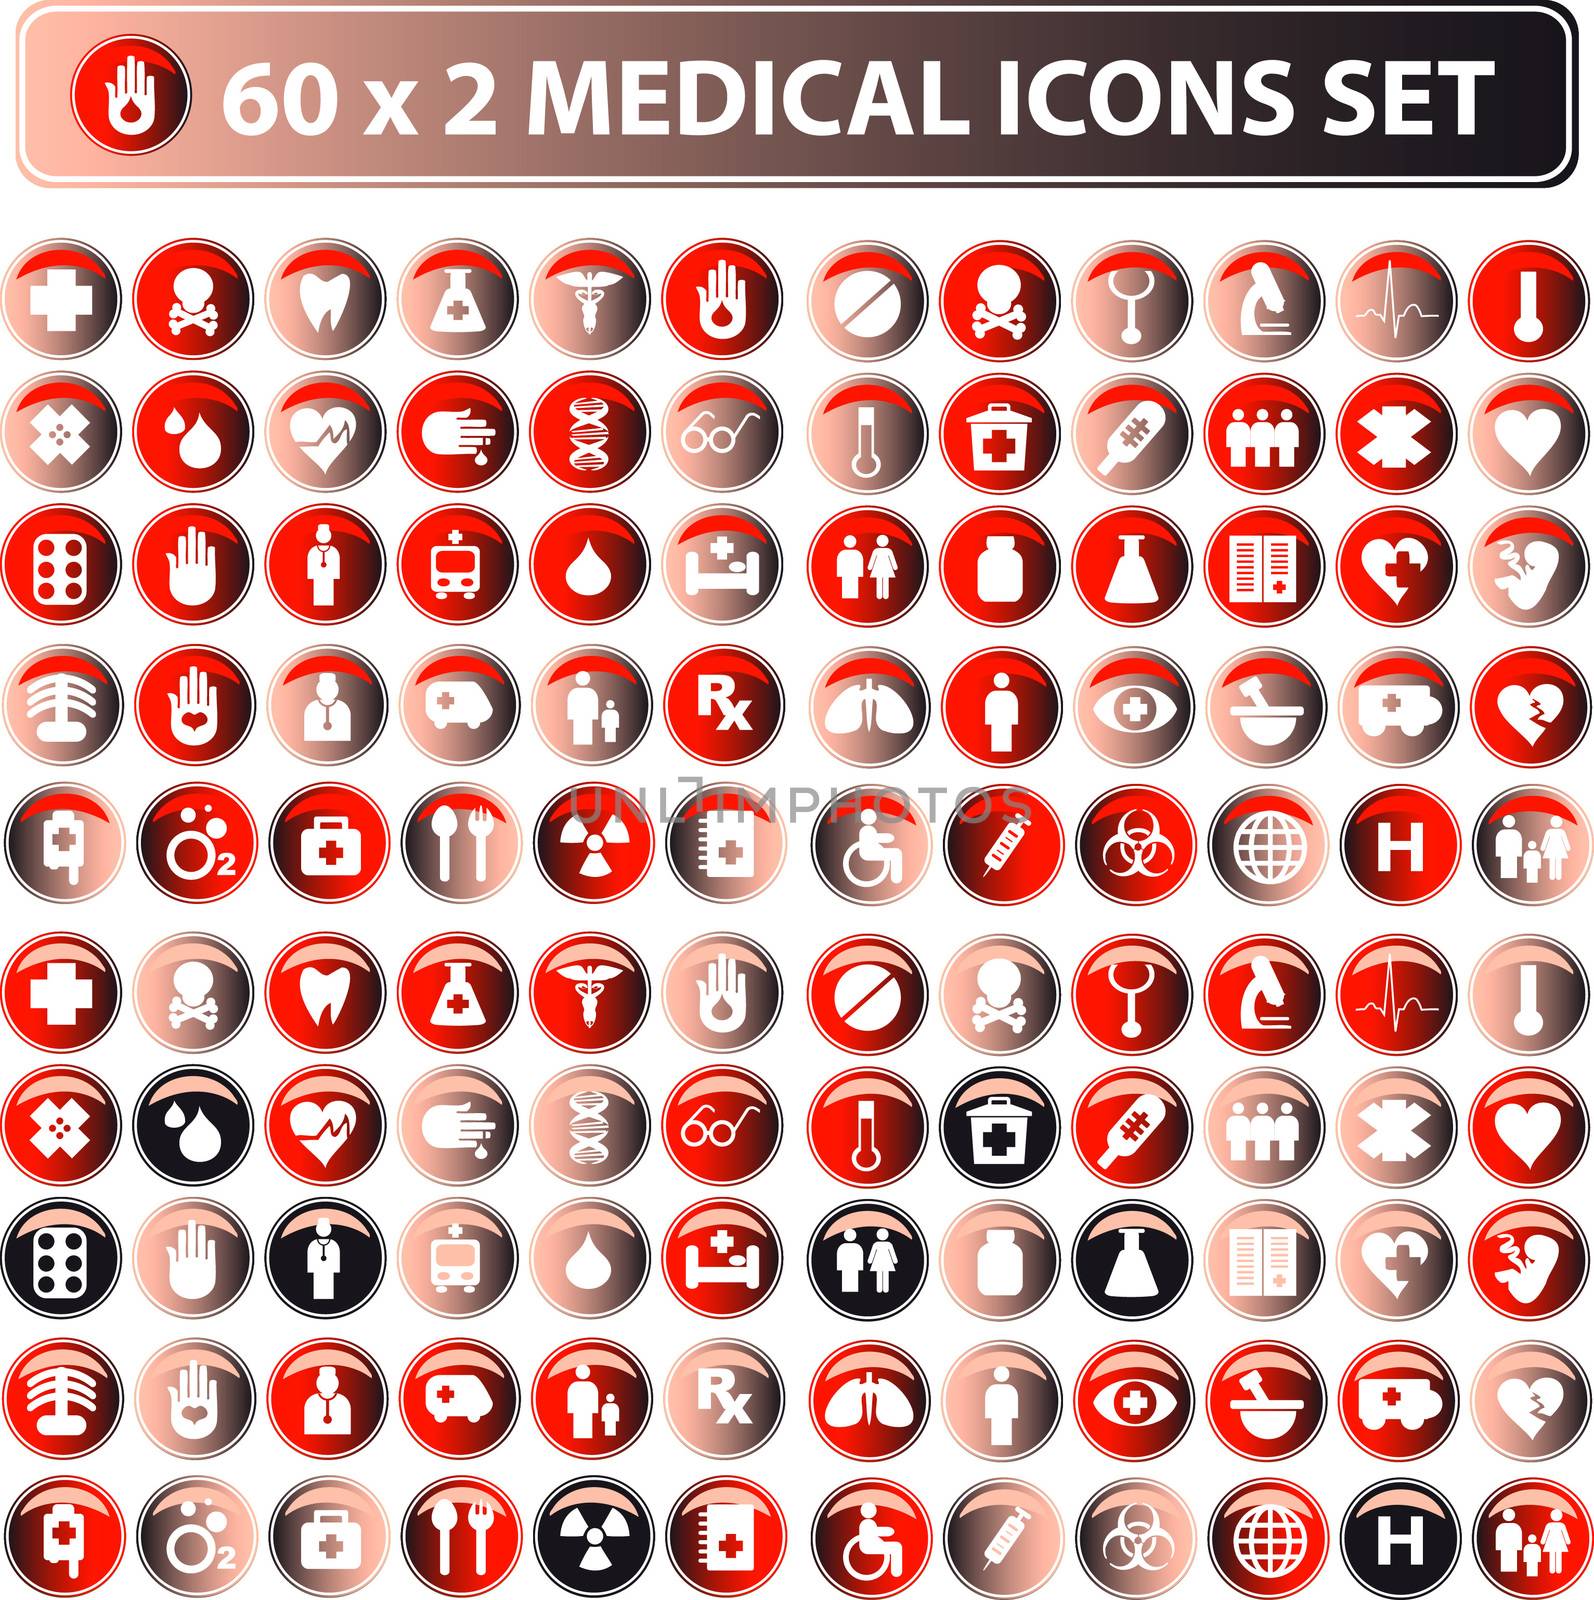 60x2 shiny Medical icons, button web set, eco color by IconsJewelry